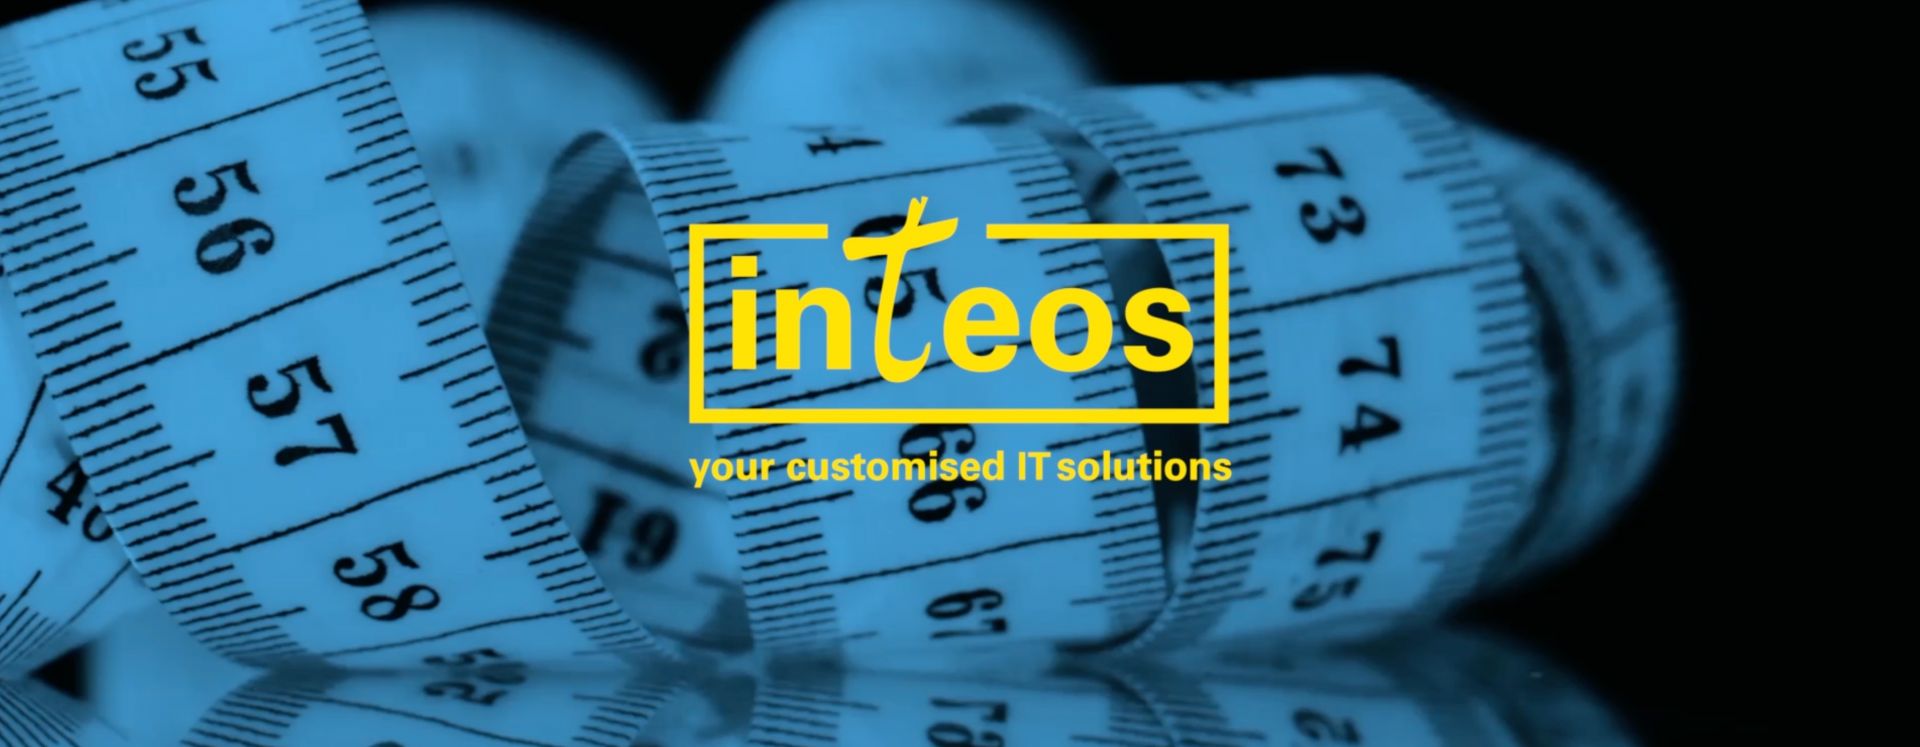 inteos® – customised textile solutions for MES and ERP!